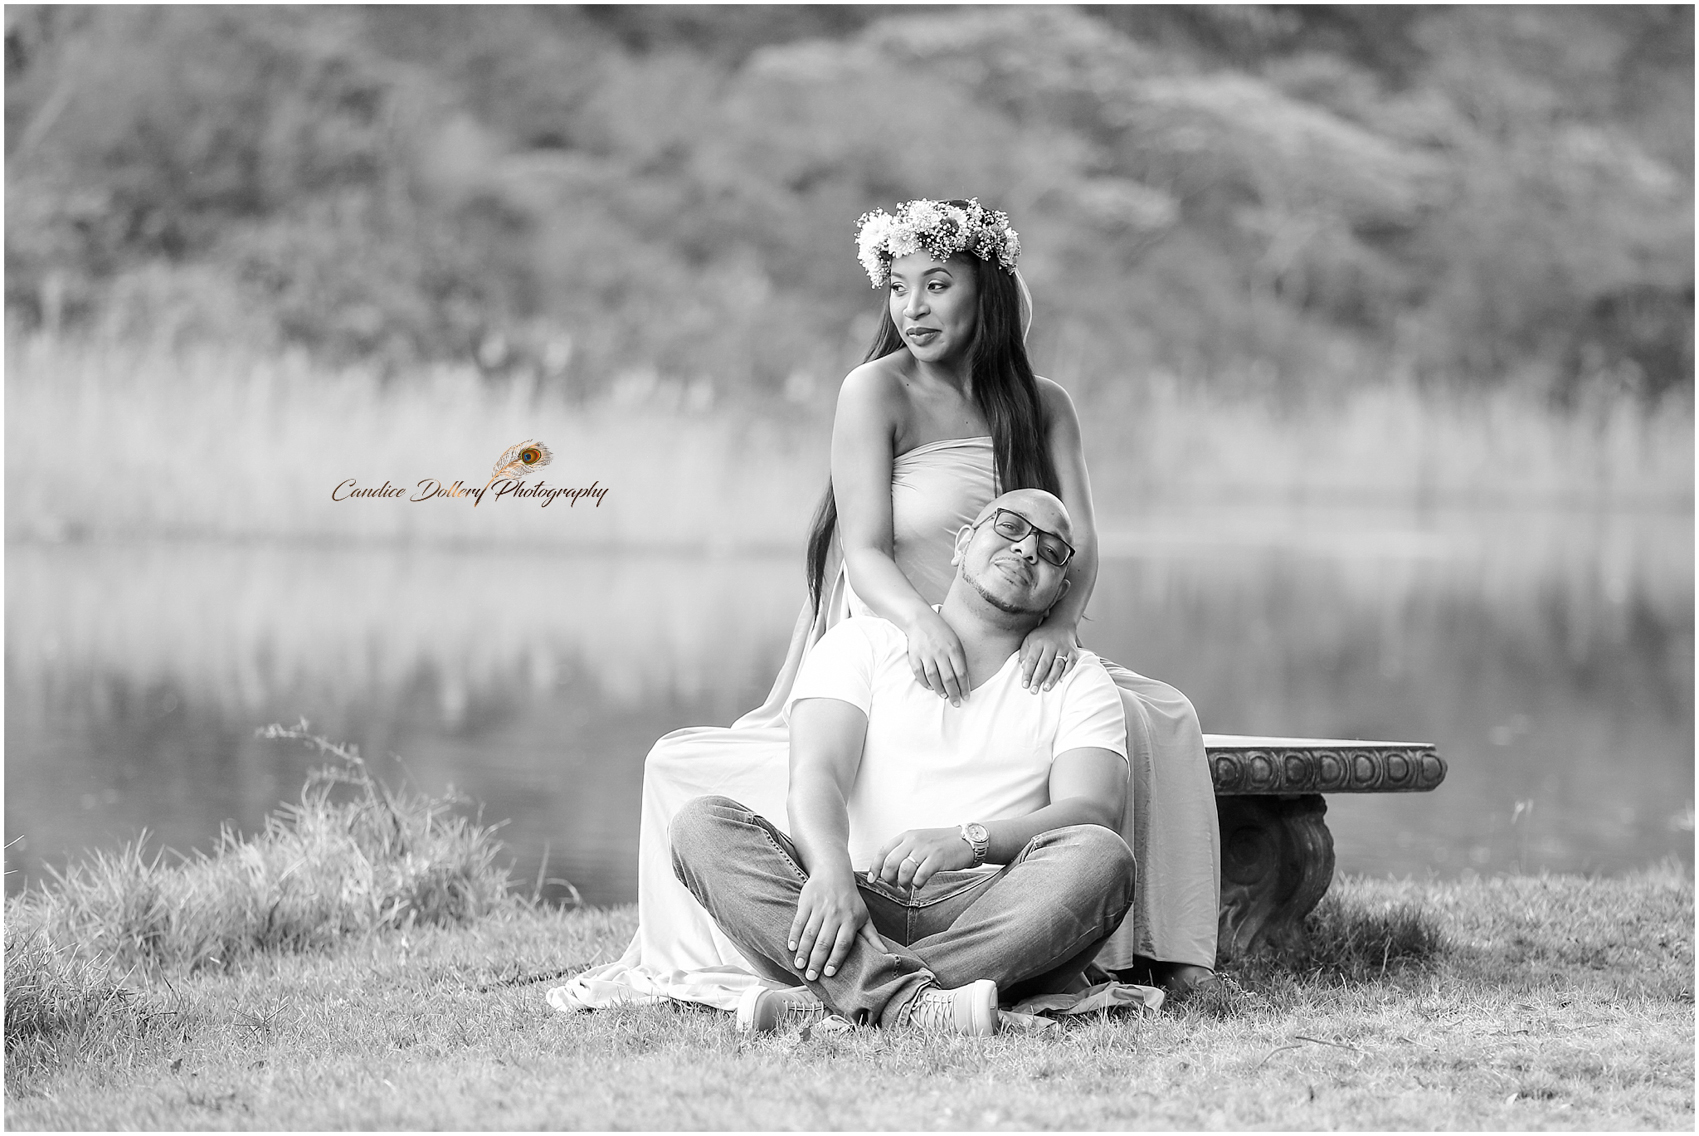 Nthabie & Lawrence - Candice Dollery_1756